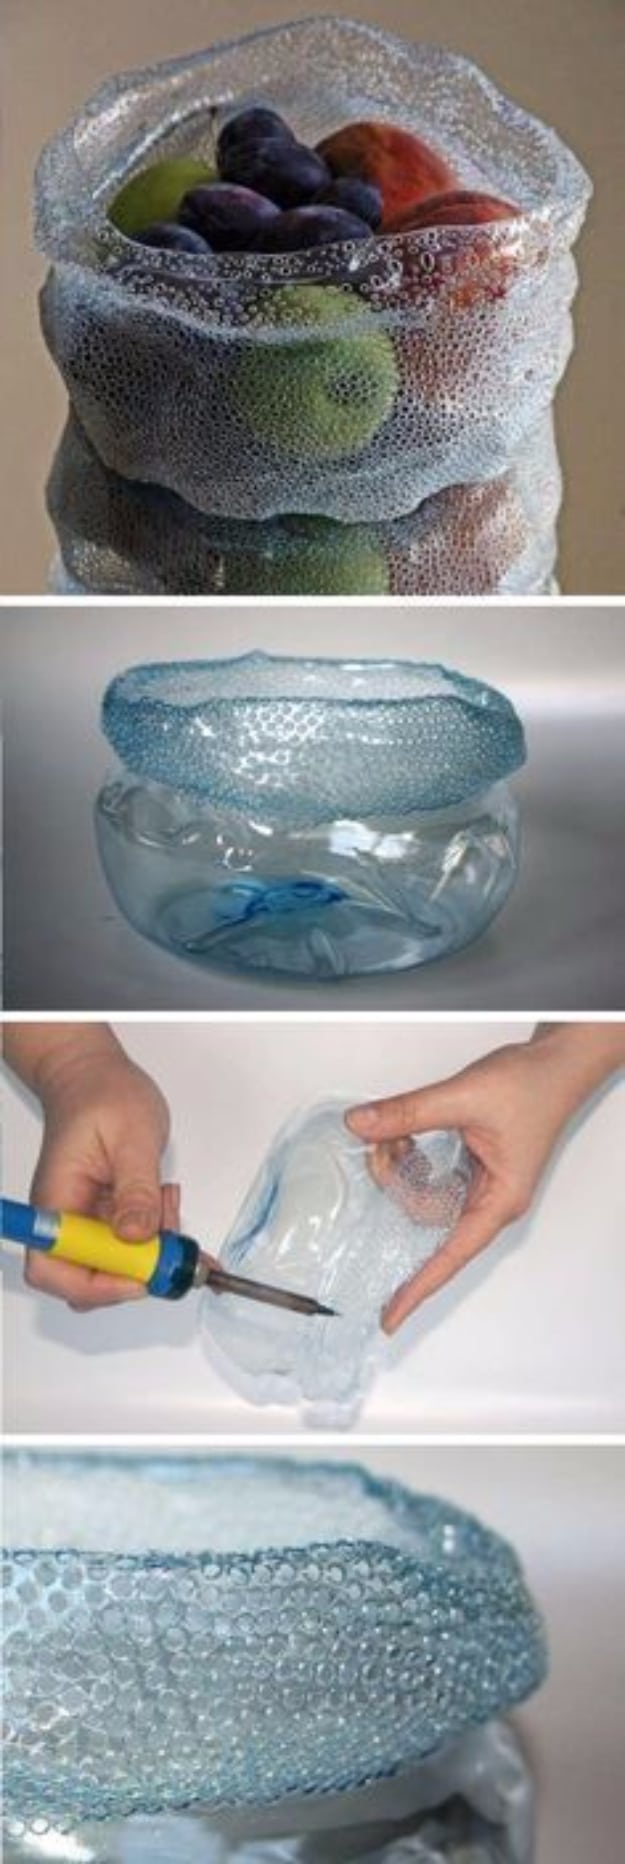 Cool DIY Projects Made With Plastic Bottles - Art Bowl From Plastic Bottle - Best Easy Crafts and DIY Ideas Made With A Recycled Plastic Bottle - Jewlery, Home Decor, Planters, Craft Project Tutorials - Cheap Ways to Decorate and Creative DIY Gifts for Christmas Holidays - Fun Projects for Adults, Teens and Kids 